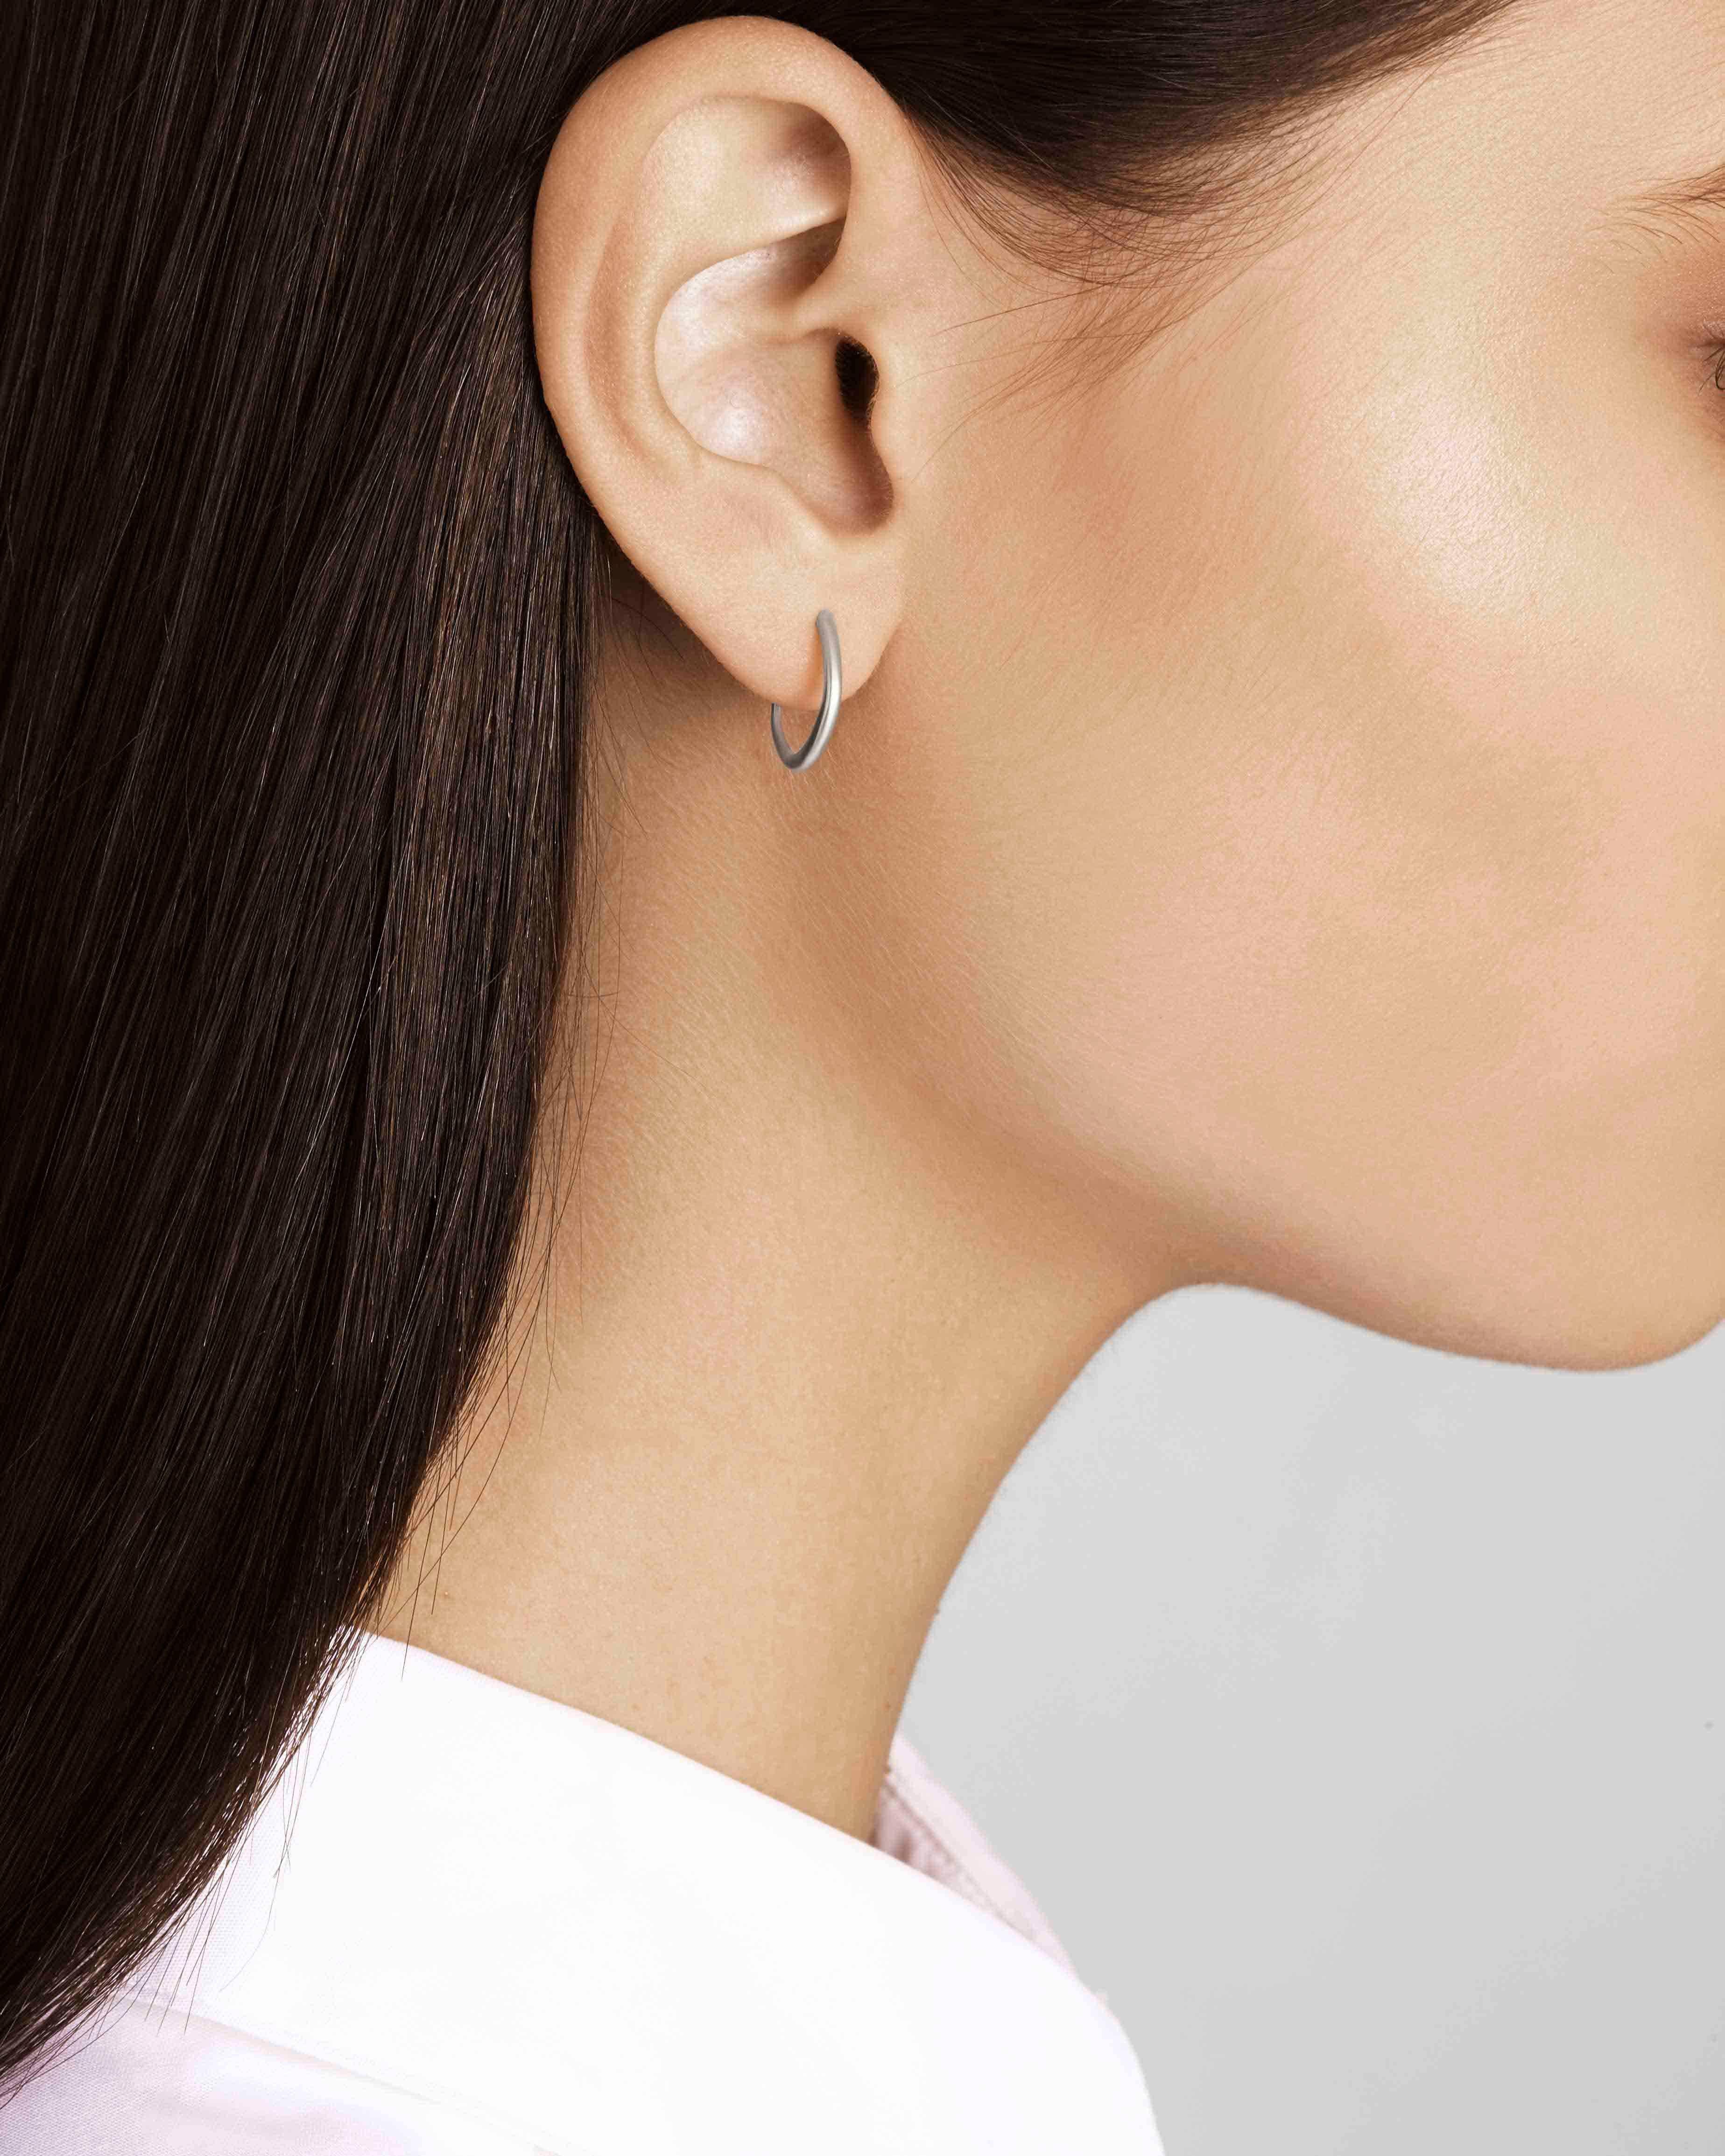 These delicate hoop earrings are crafted in solid sterling silver with a post and butterfly closure. Modelled after traditional Touareg jewellery, these earrings are a bohemian take on the classic silver hoop.  Handmade in London. 